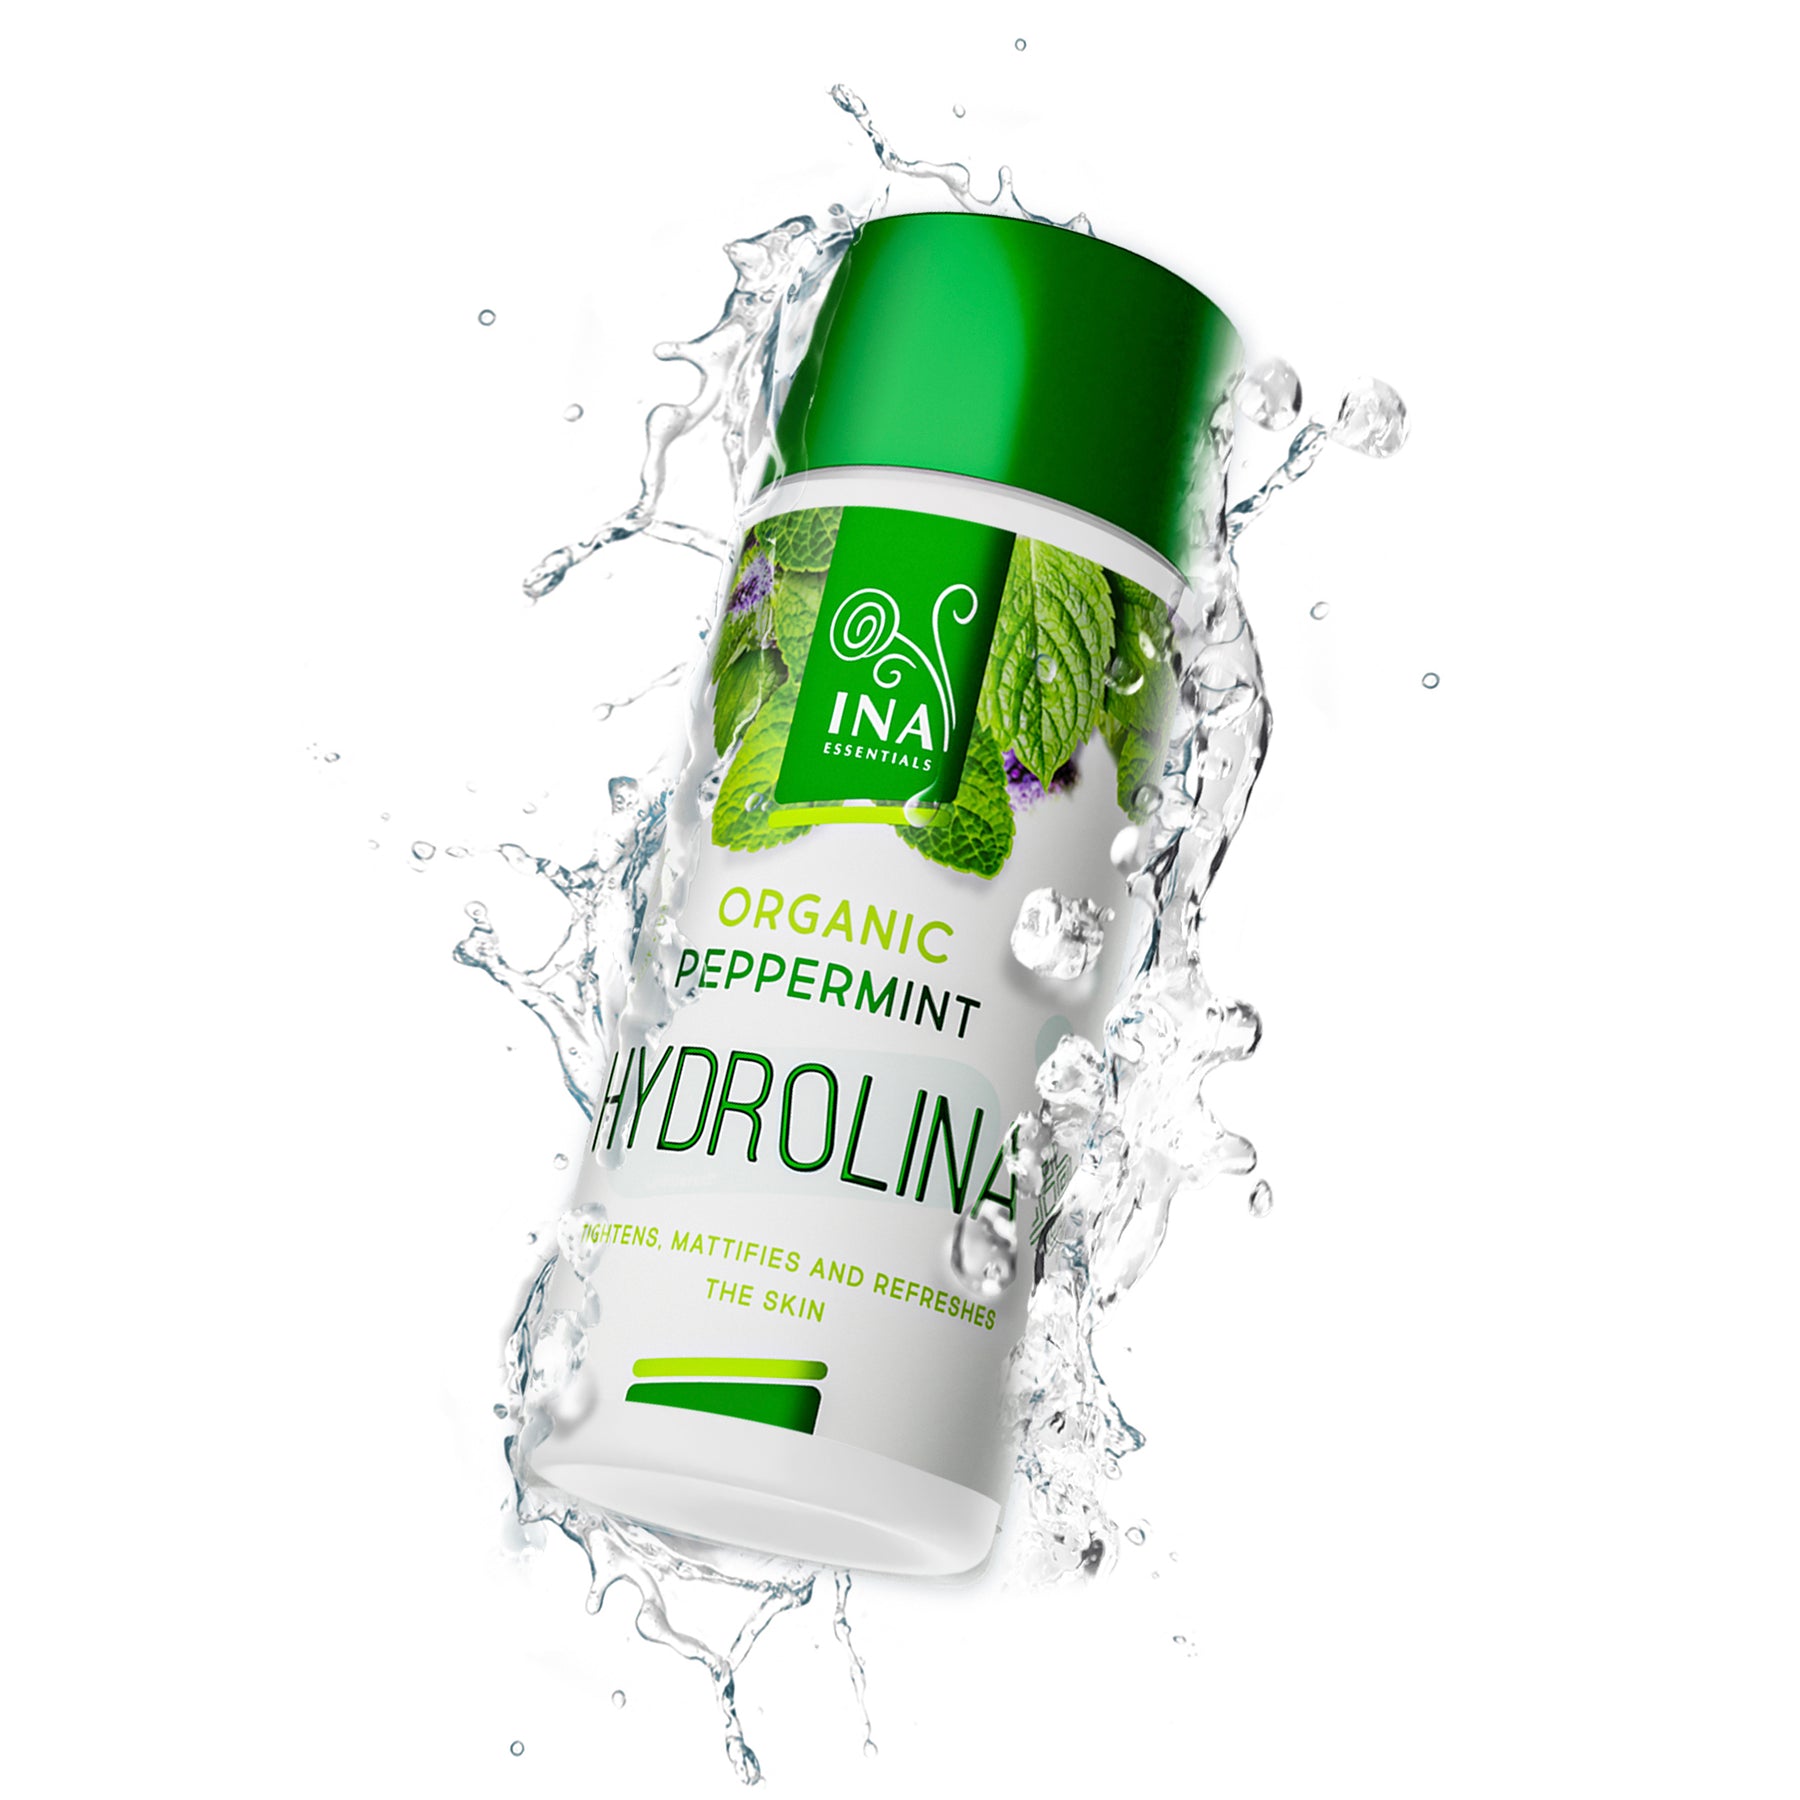 Organic Peppermint Hydrolina for TIGHTENING and MATTIFYING the skin